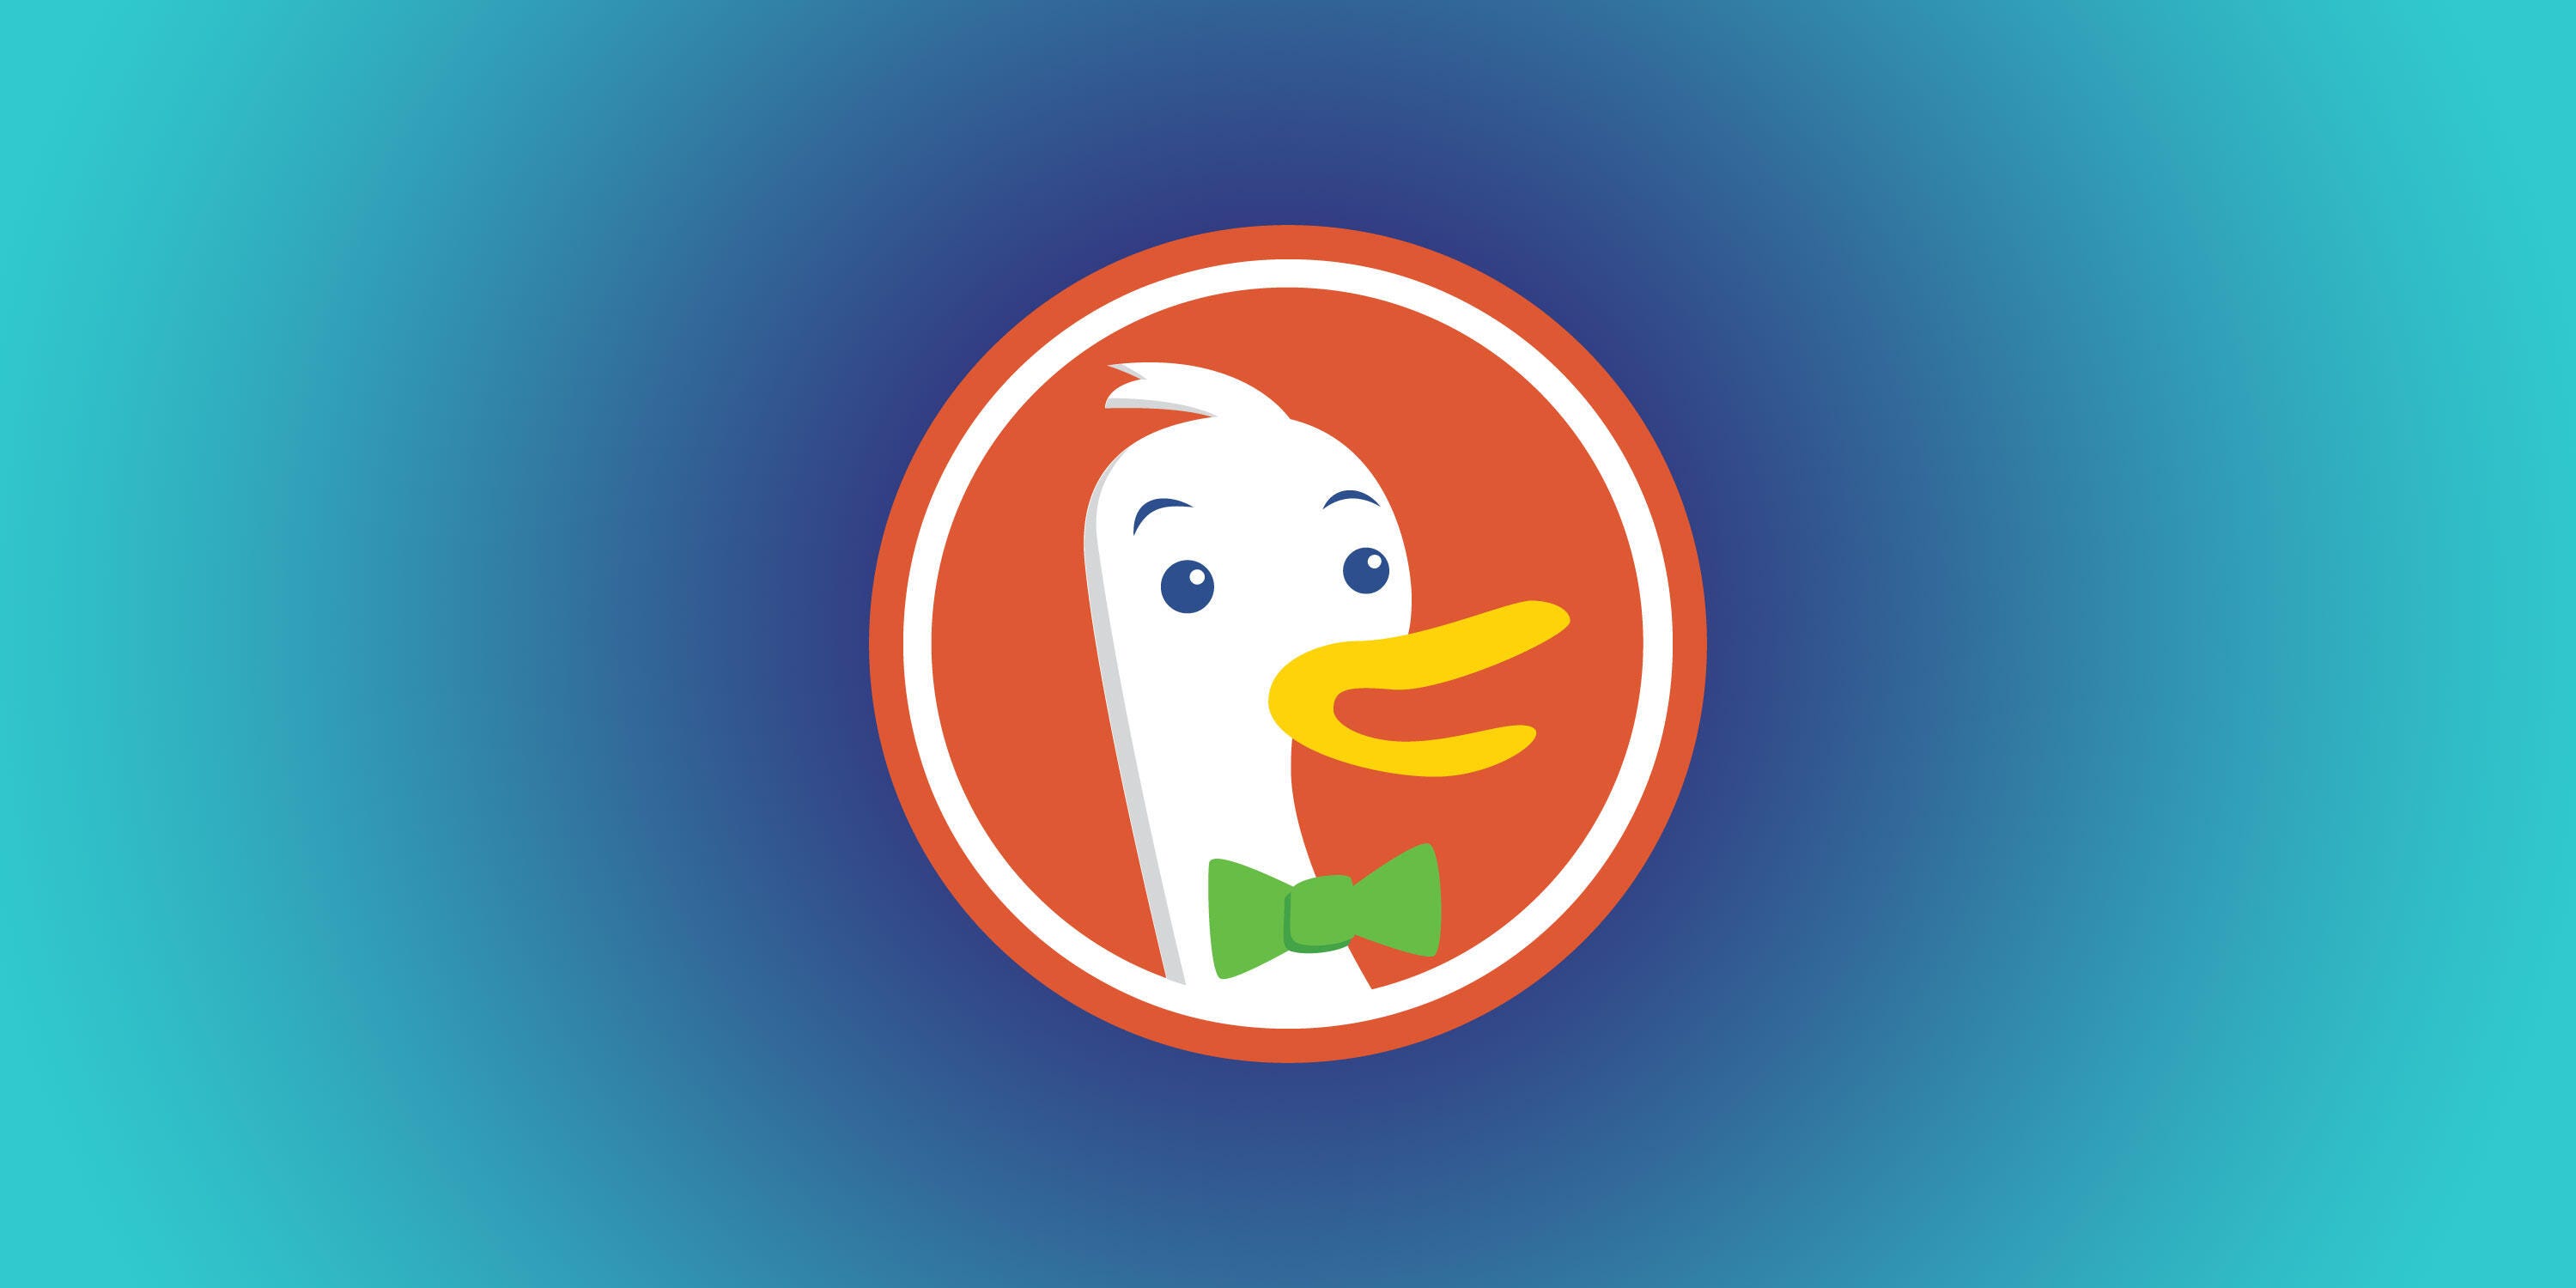 Google Search rival DuckDuckGo: What to know about the private search engine